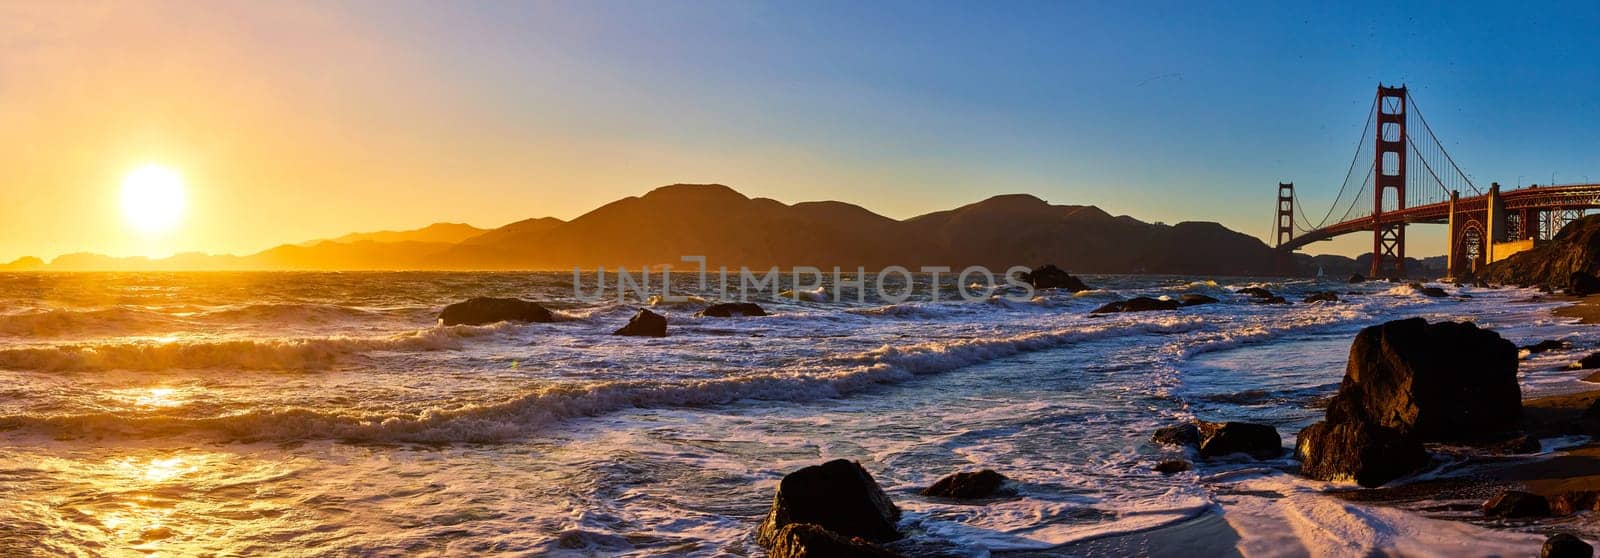 Image of Panorama sunset over waves and distant mountain with Golden Gate Bridge